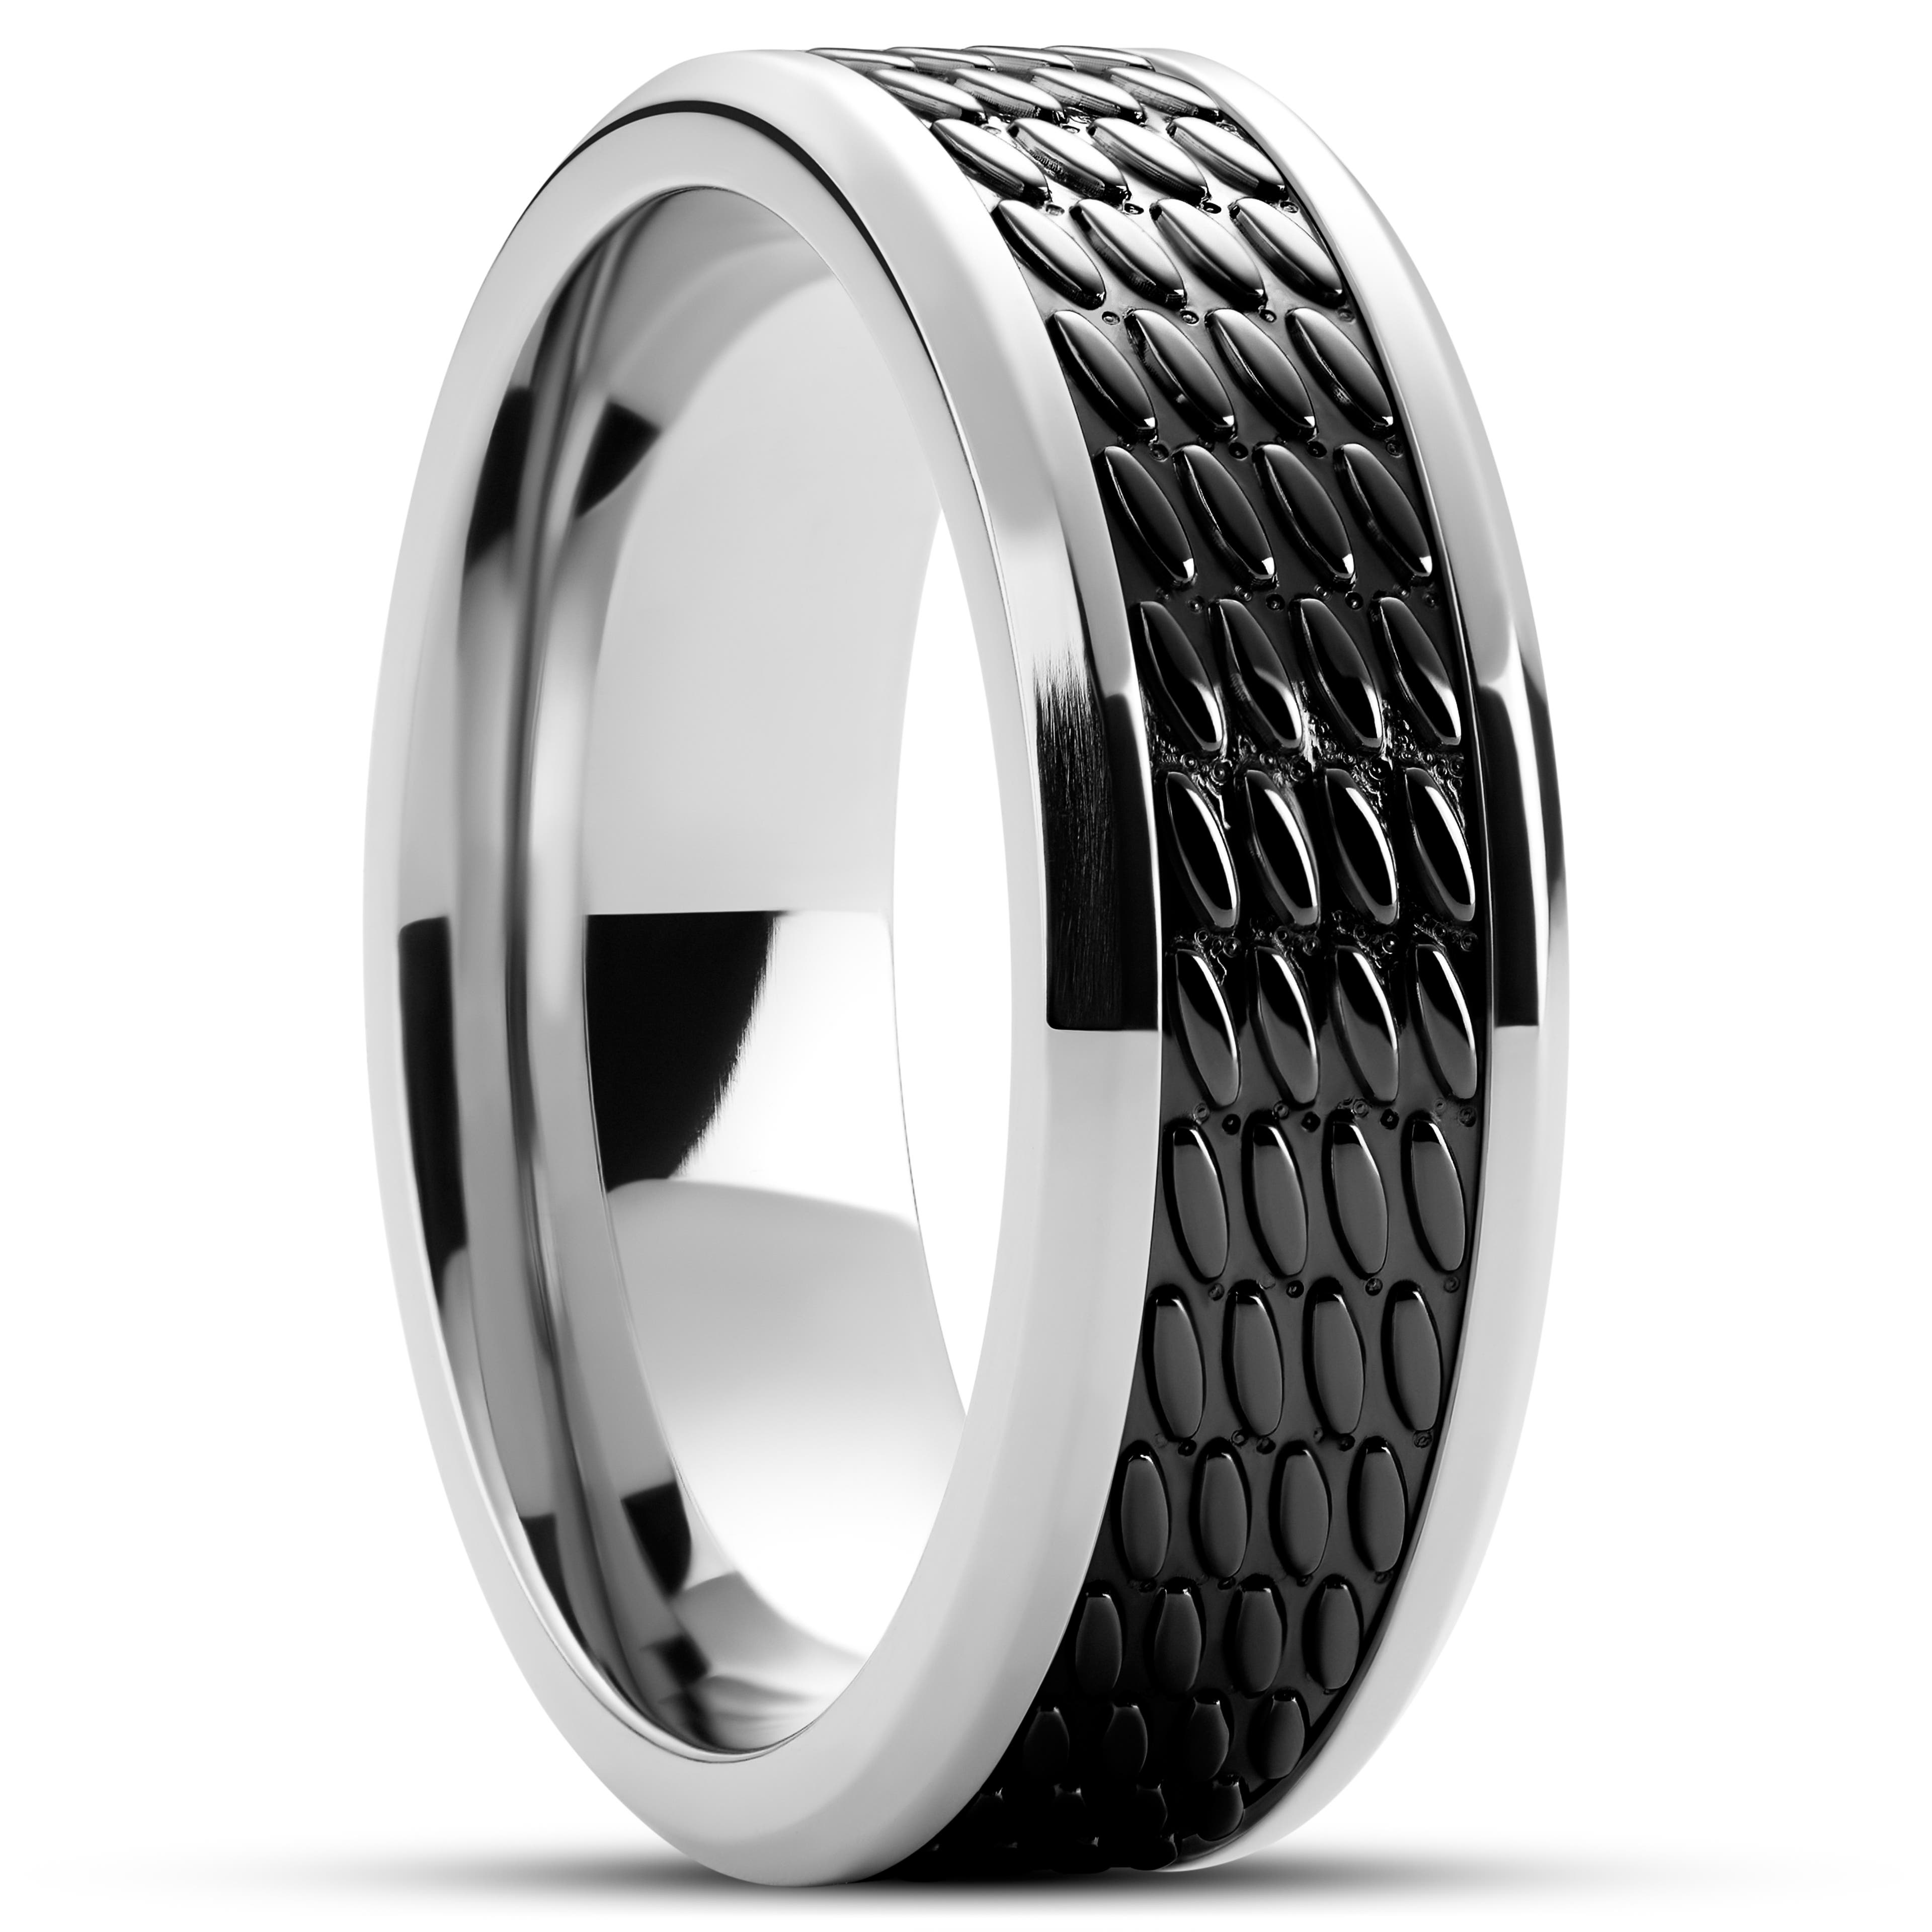 Hyperan | 1/3" (8 mm) Silver-tone Titanium Ring with Black Oval Pattern